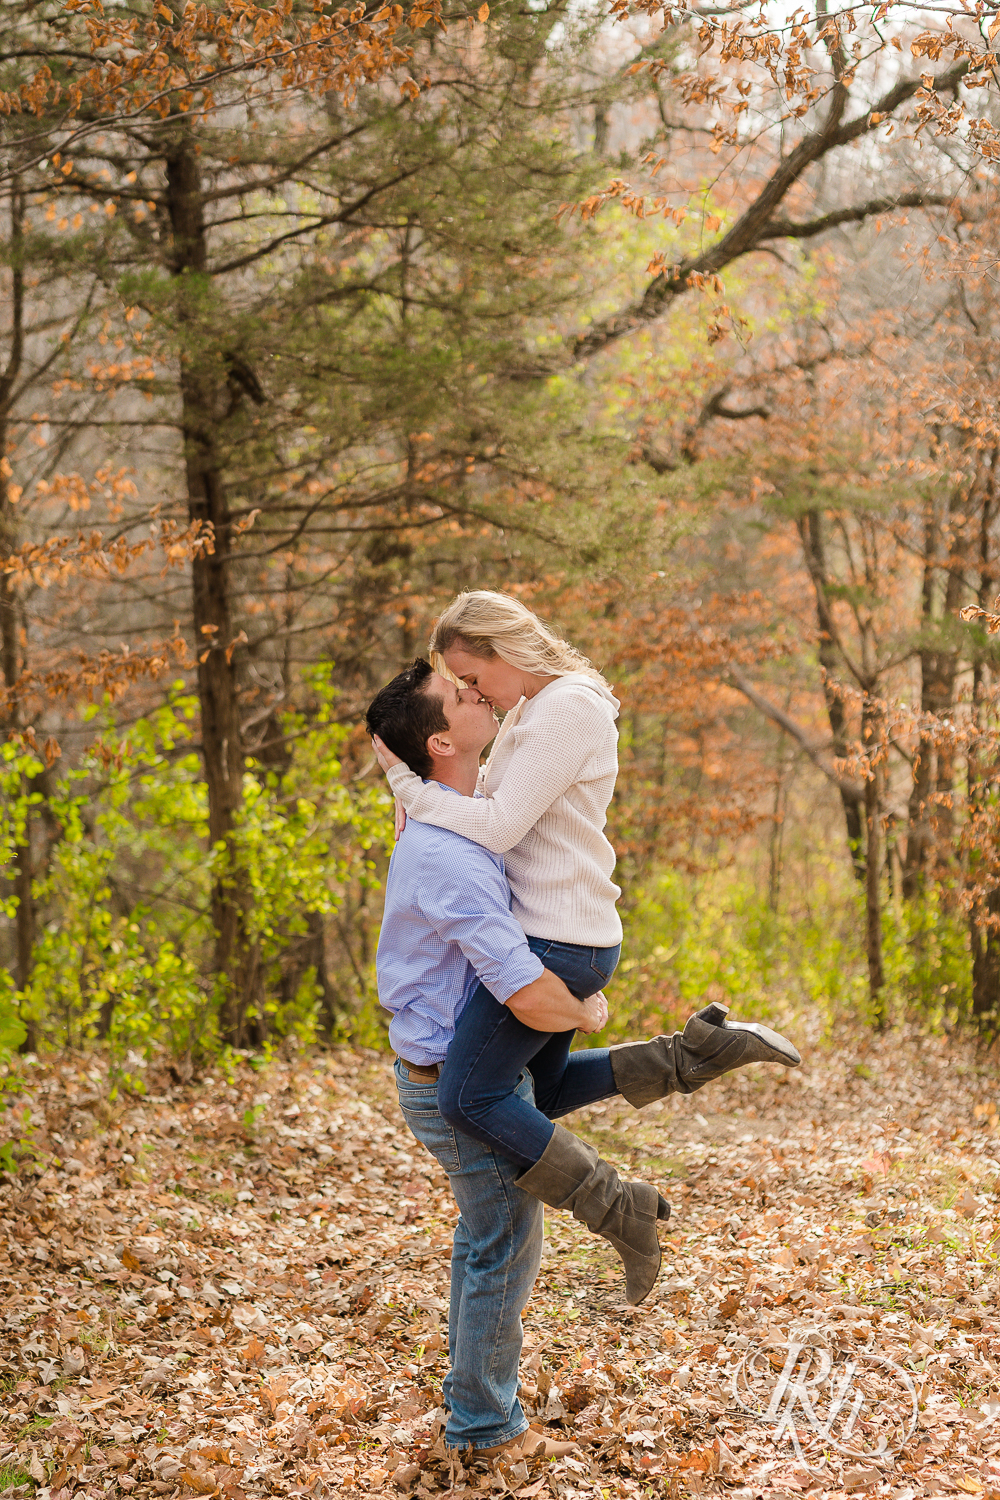 Man lifting and kissing blonde woman in leaves during fall engagement photography session in Chaska, Minnesota.